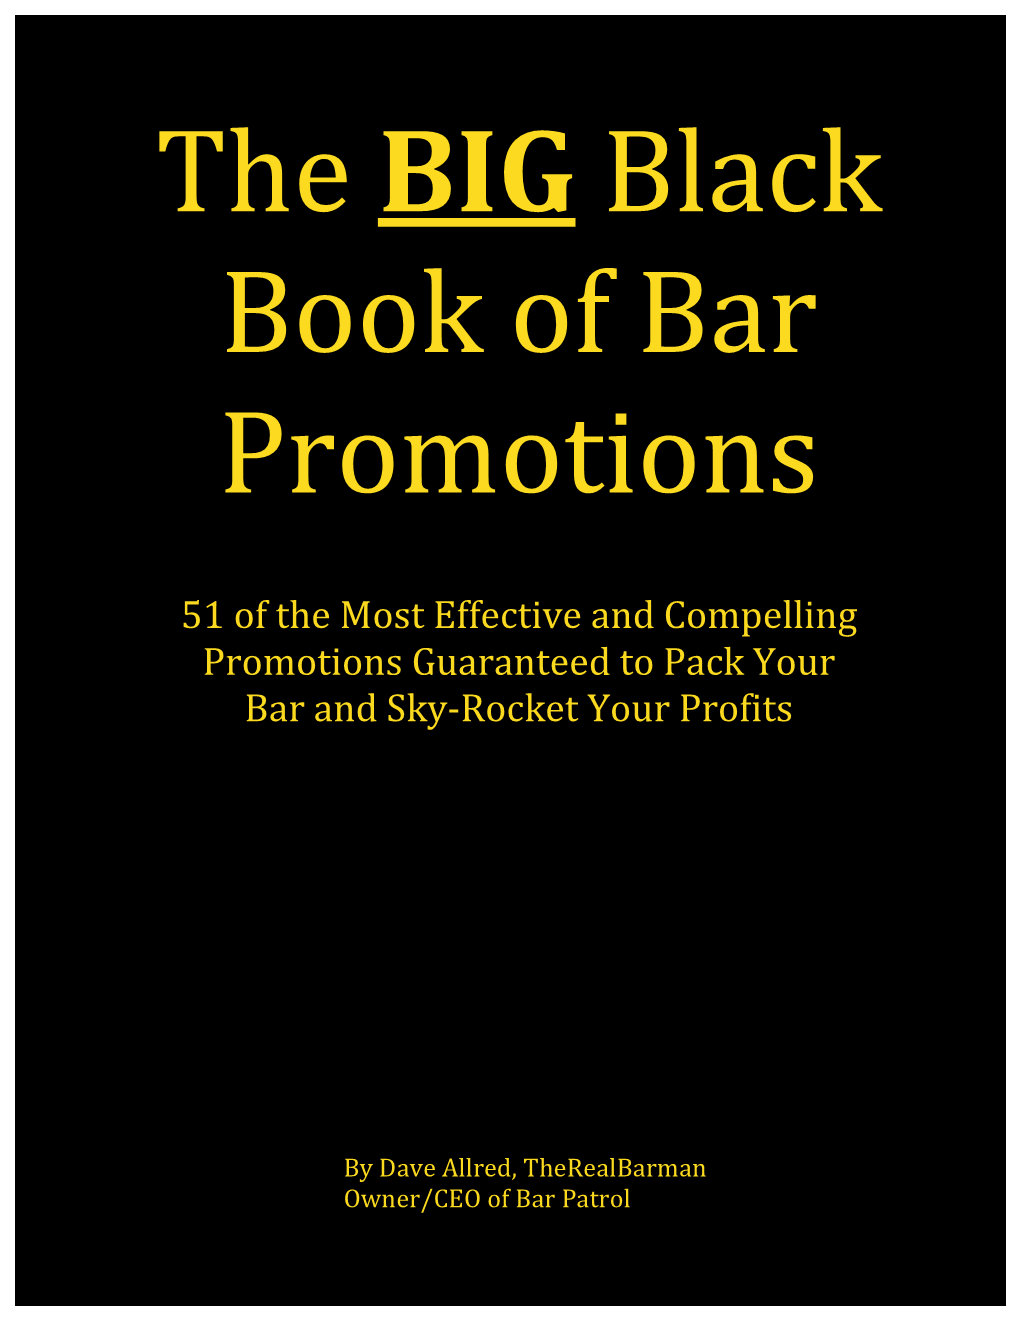 51 of the Most Effective and Compelling Promotions Guaranteed to Pack Your Bar and Sky-Rocket Your Profits